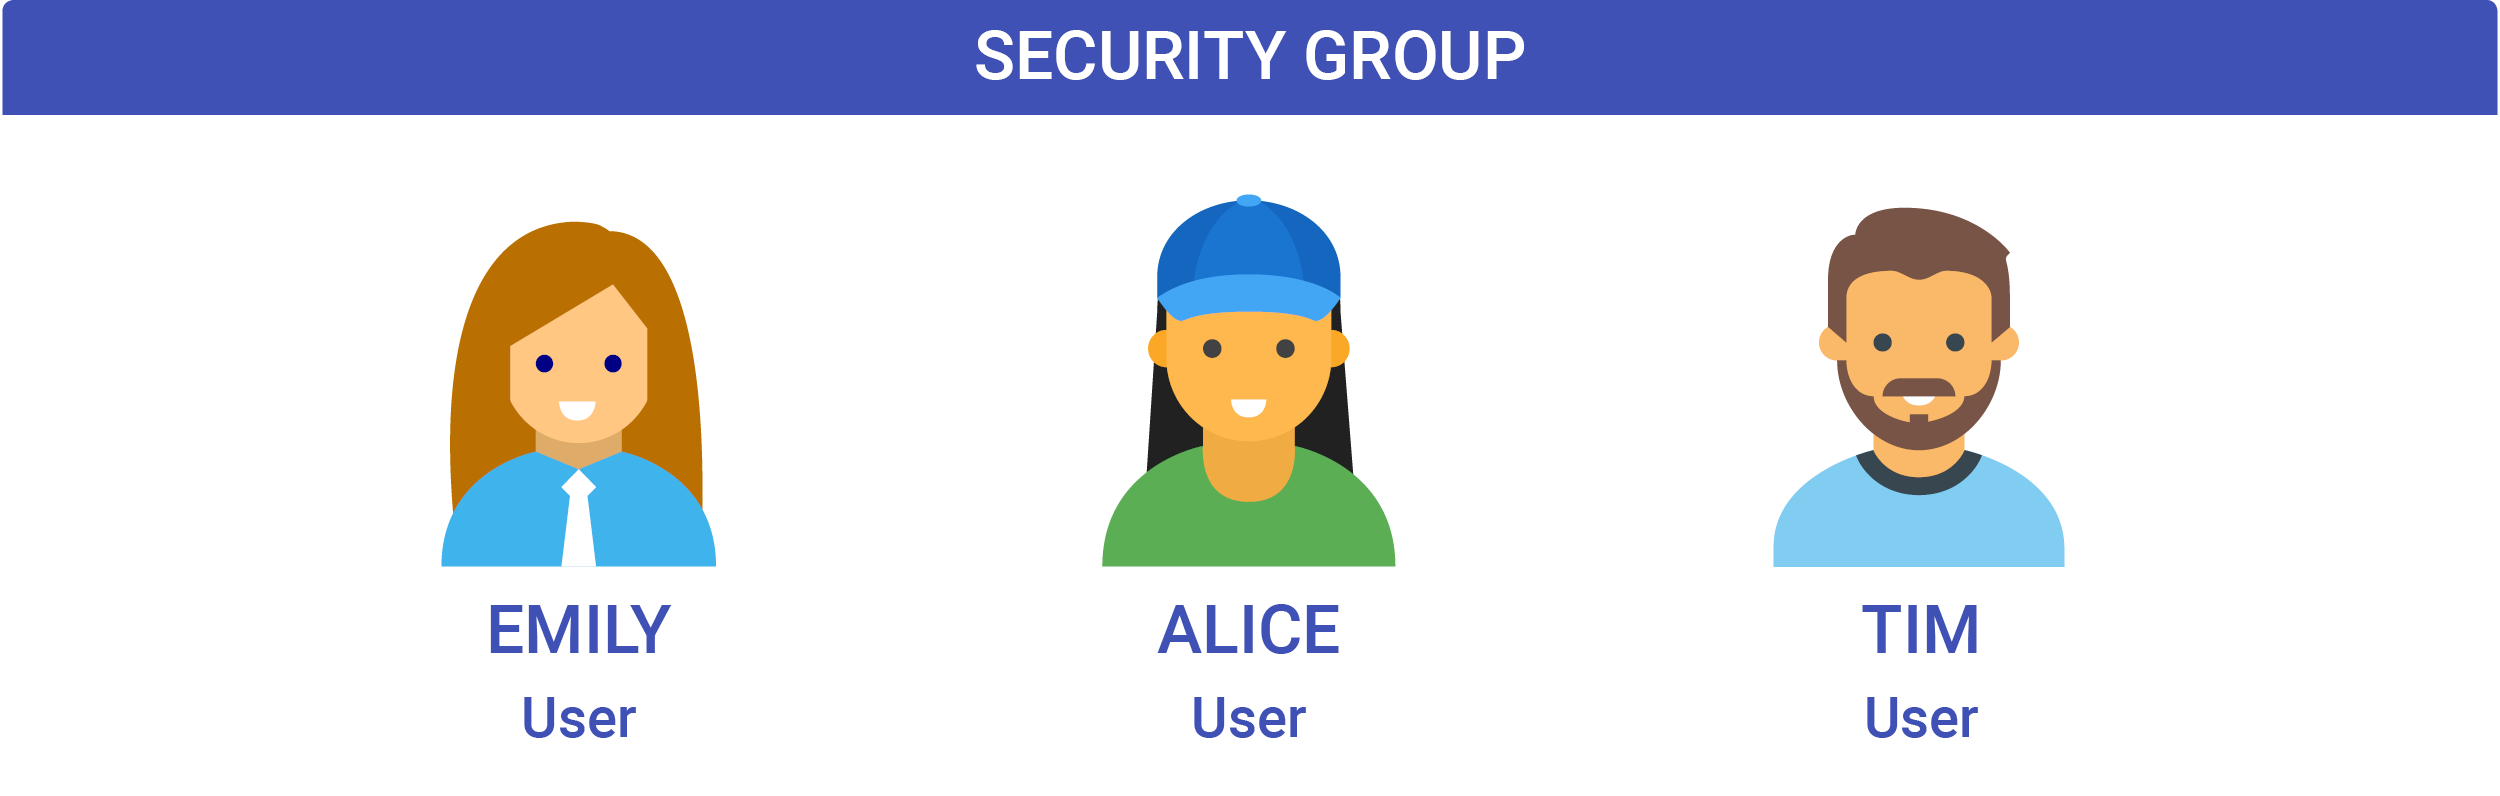 Security Group Example